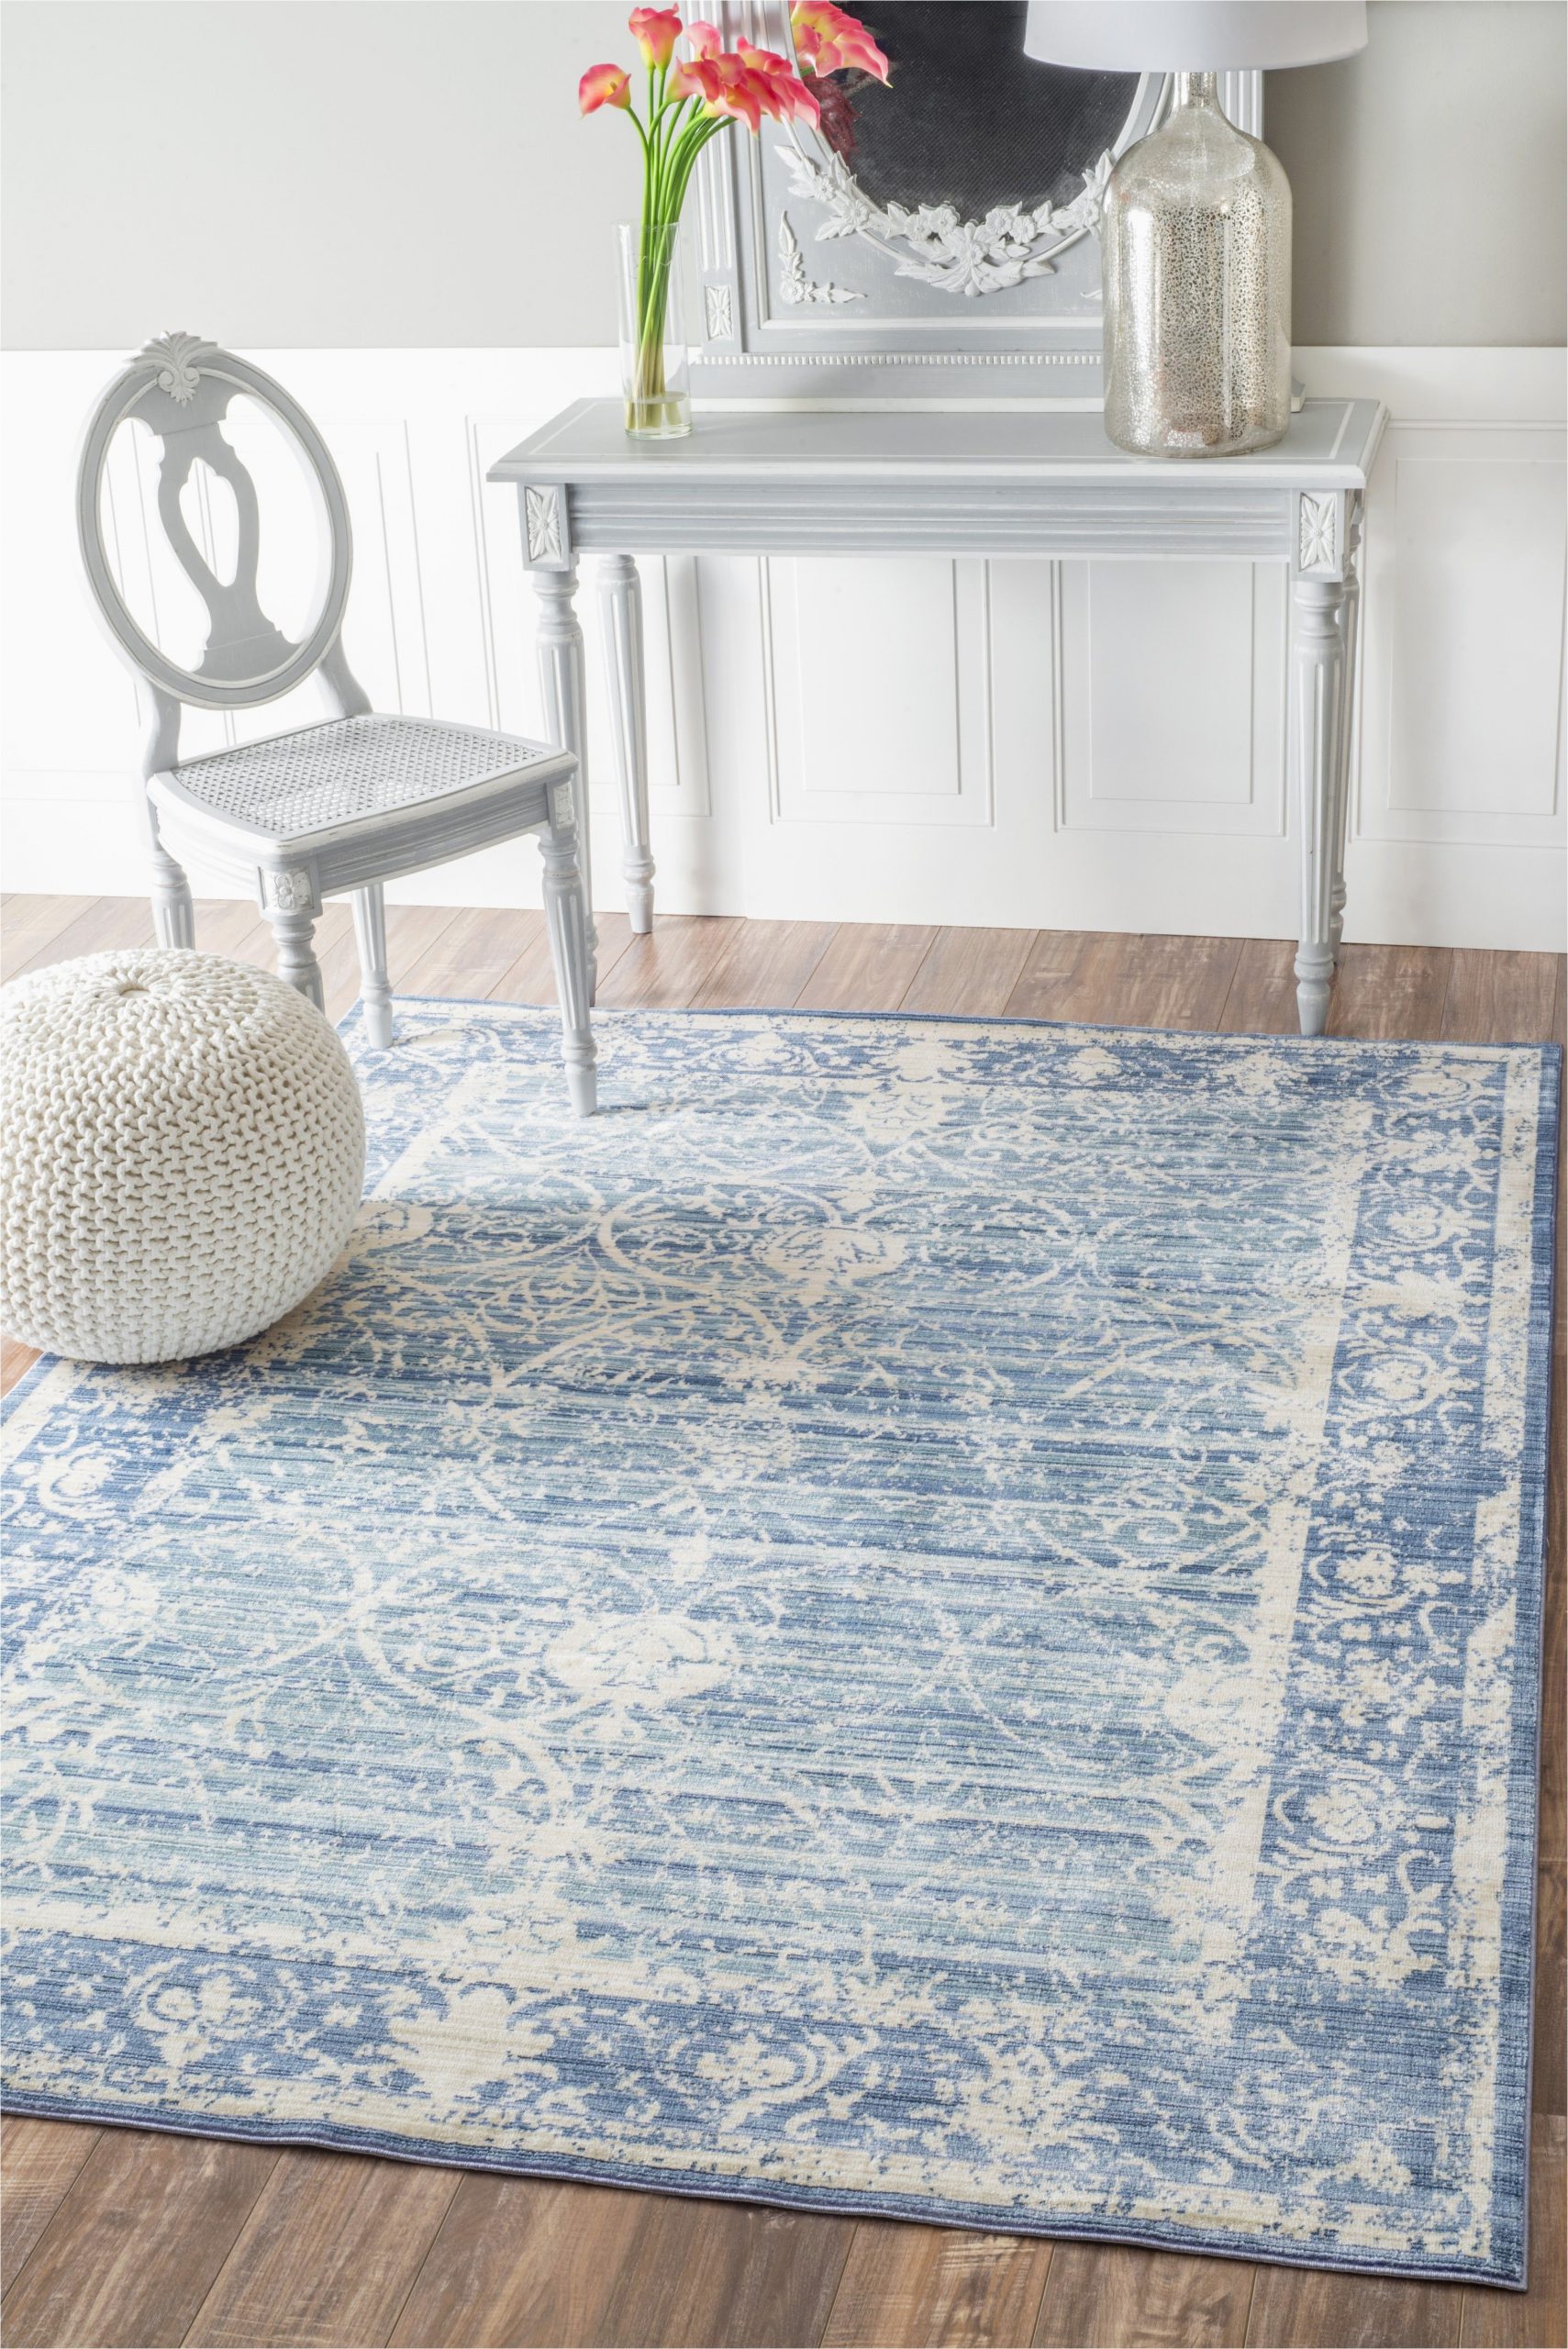 Rug White and Blue A Fabulous Blue and White Rug From One Of Rugs Usa S New